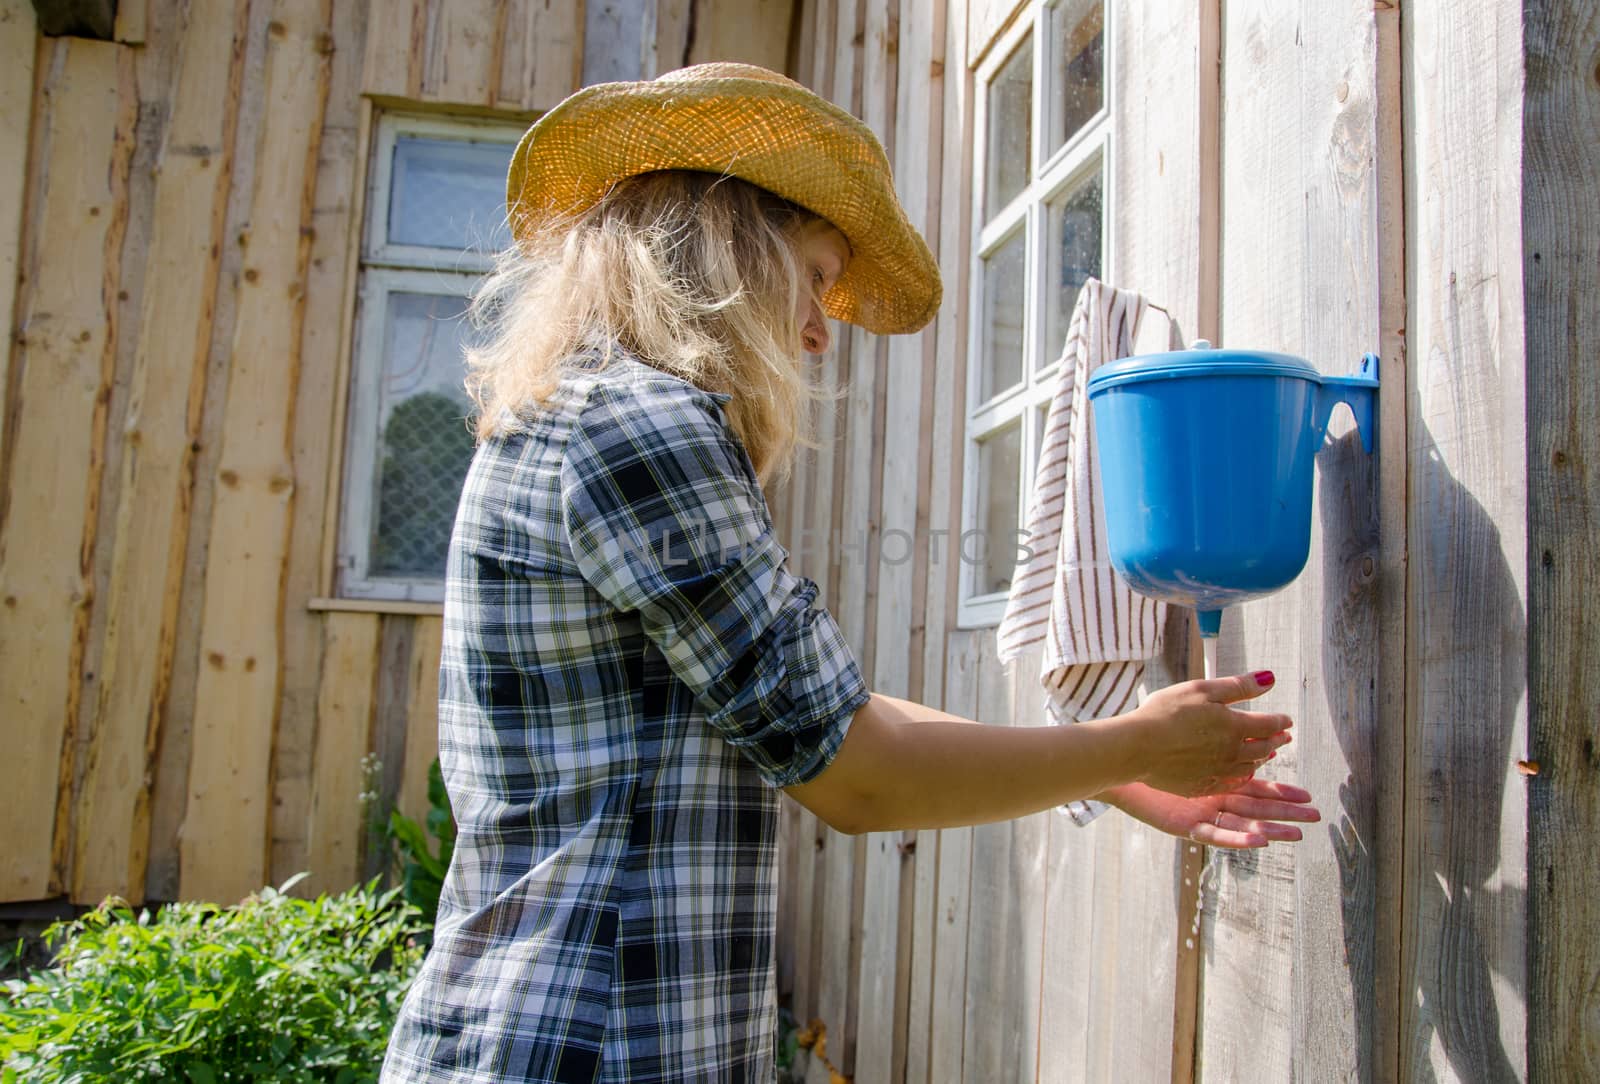 farmer cowgirl woman wash hands under rural plastic hand washer tool water.